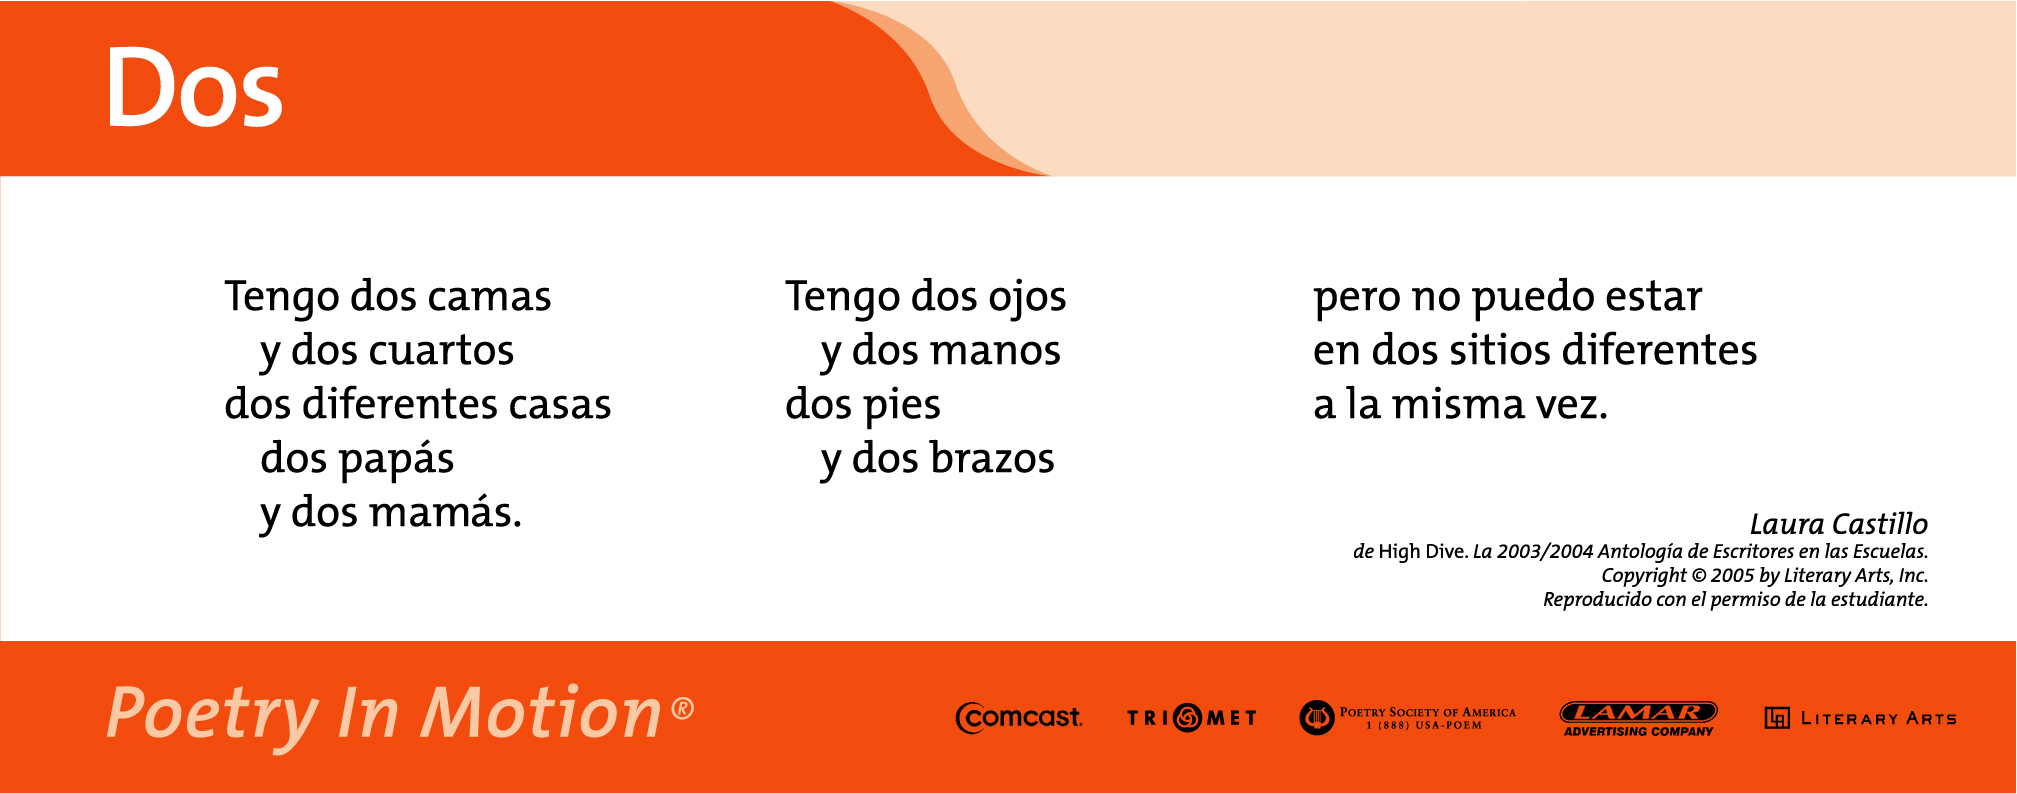 A white poster features the poem Dos by Laura Castillo. The poster is bordered by orange on the top and bottom.